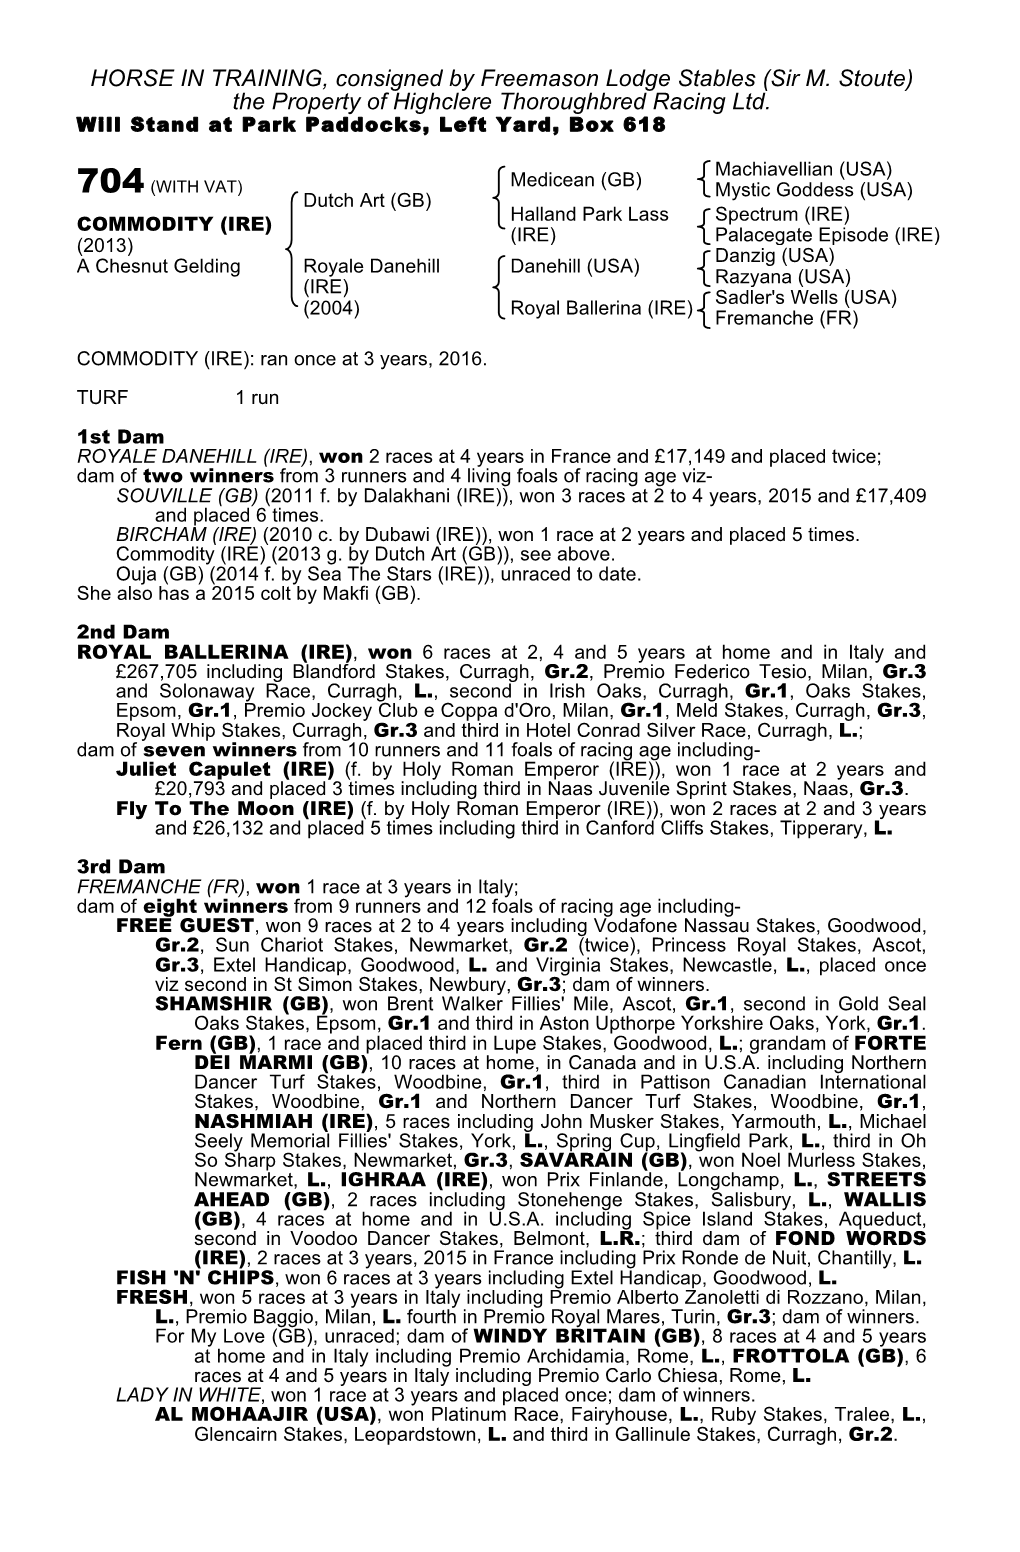 HORSE in TRAINING, Consigned by Freemason Lodge Stables (Sir M